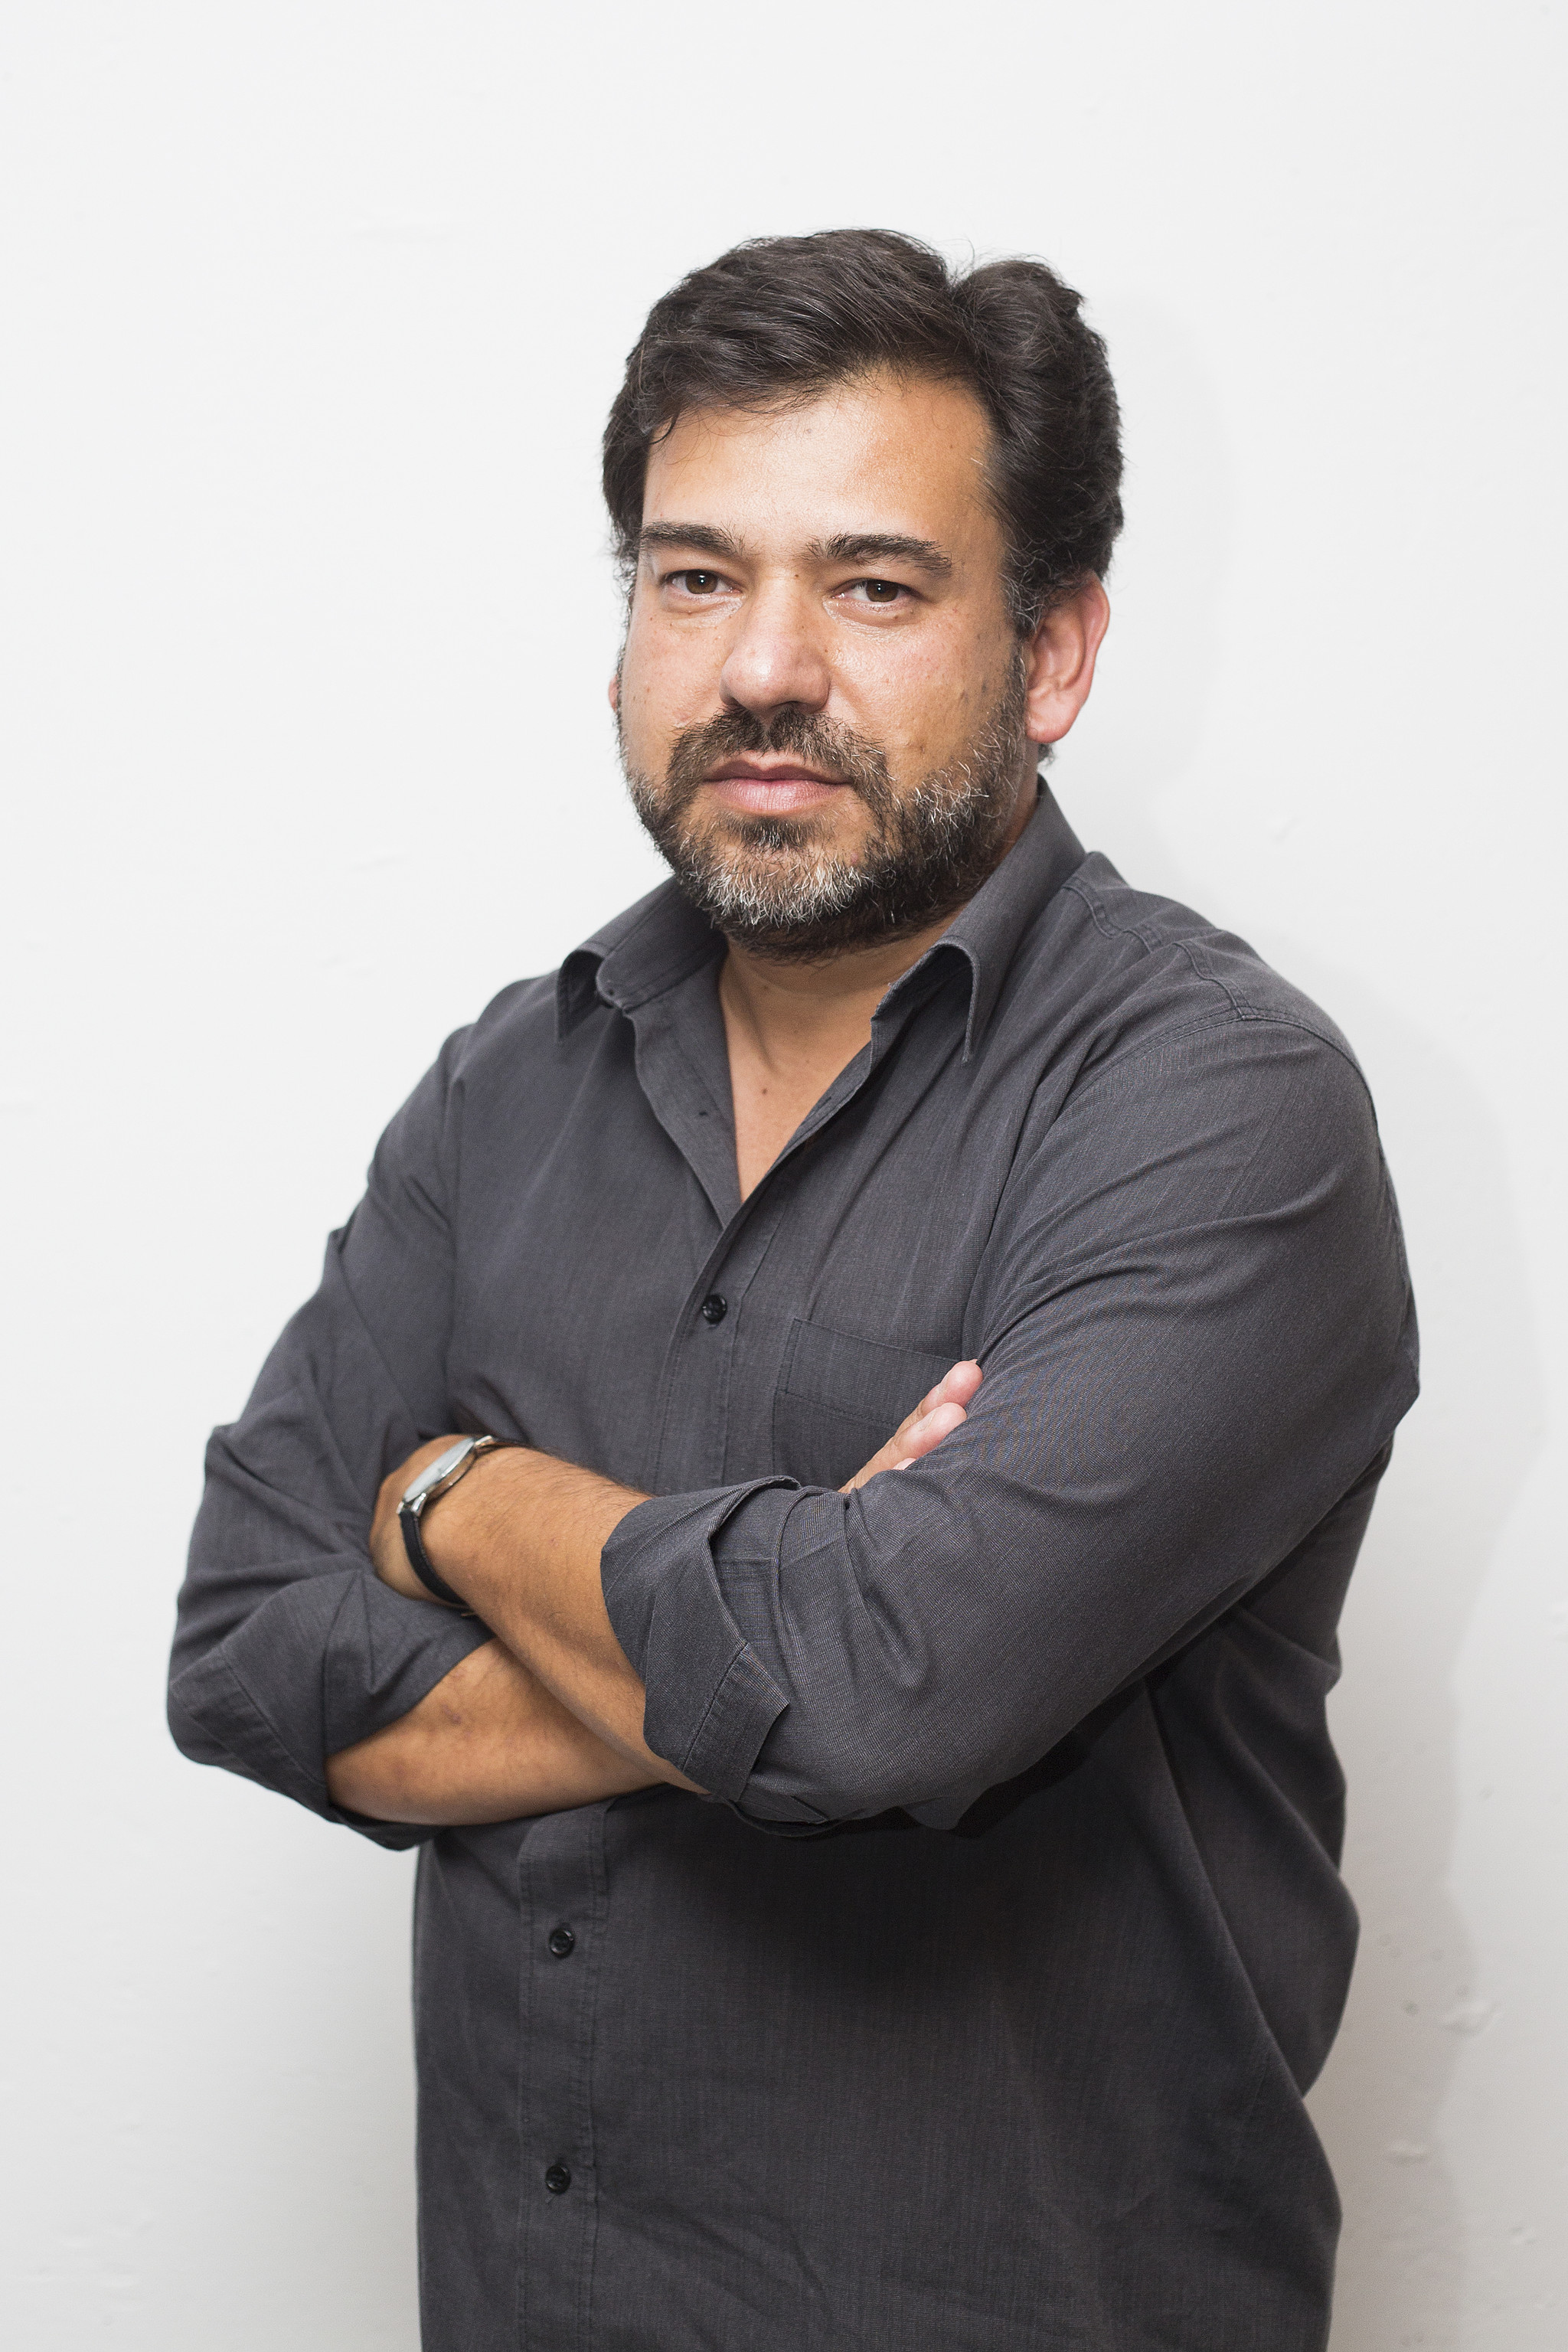 Paulo Mendes Pinto